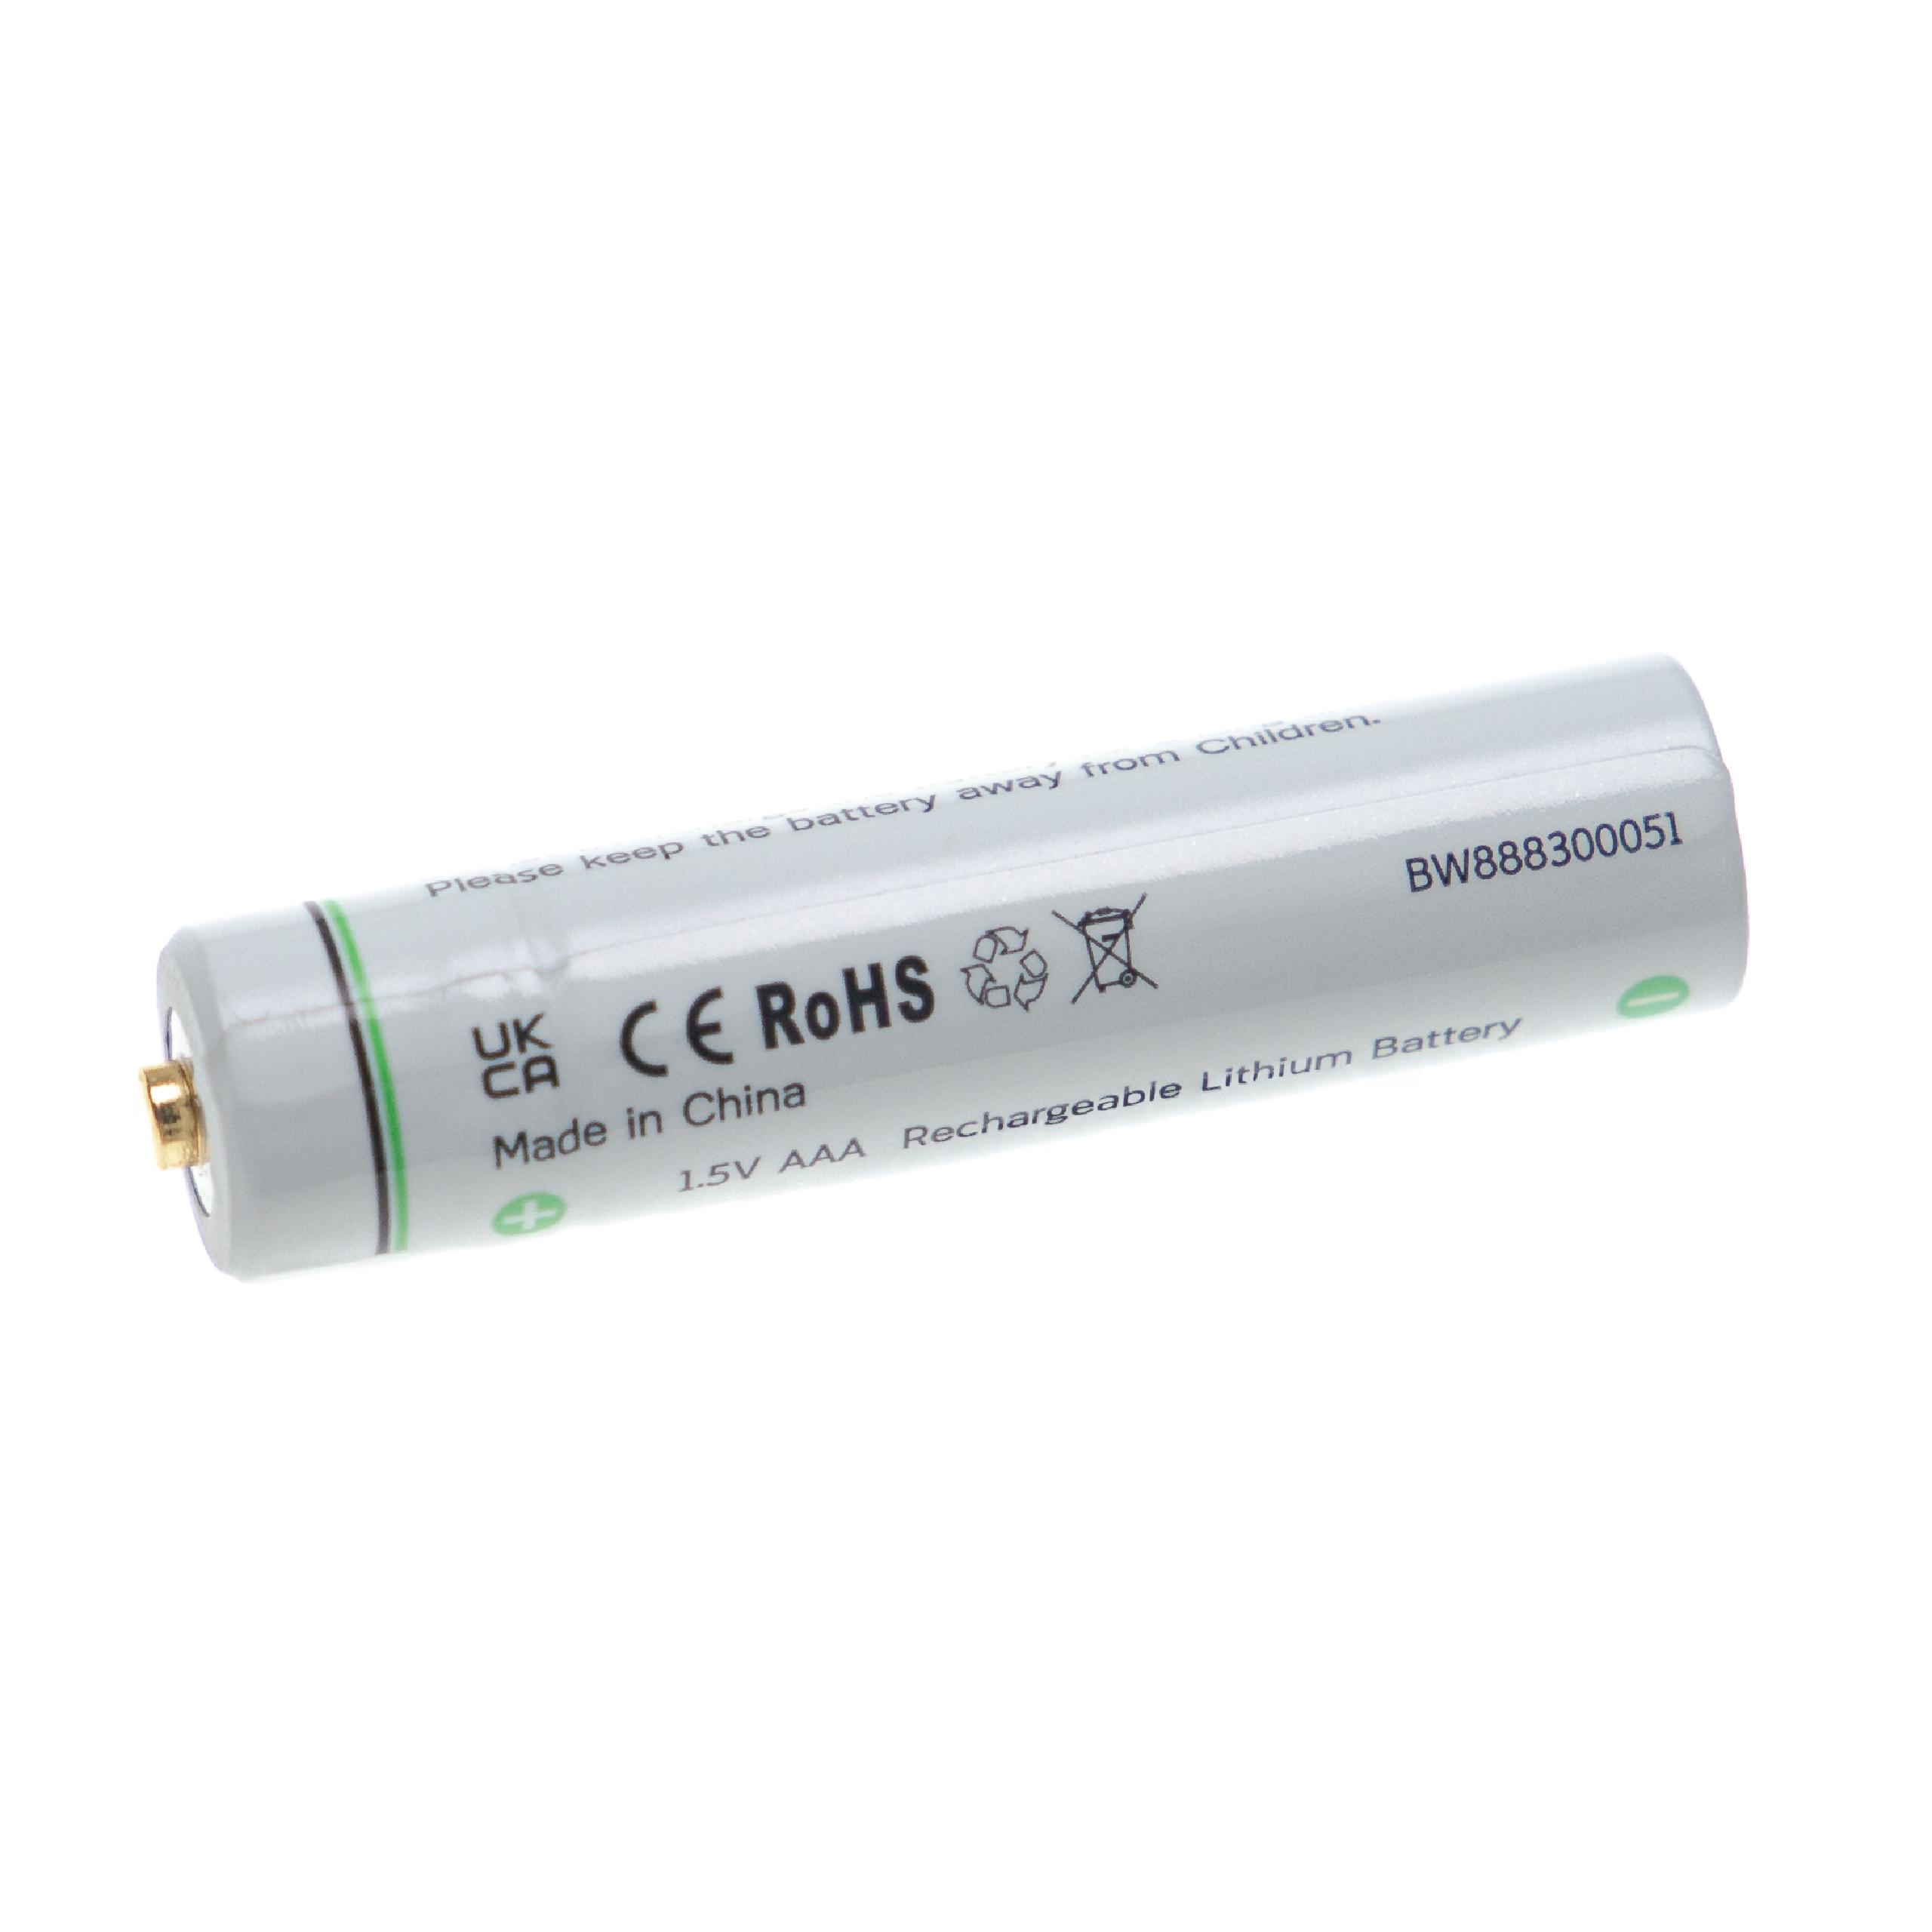 AAA Micro Replacement Battery - 280mAh 1.5V Li-Ion + Micro-USB Connection